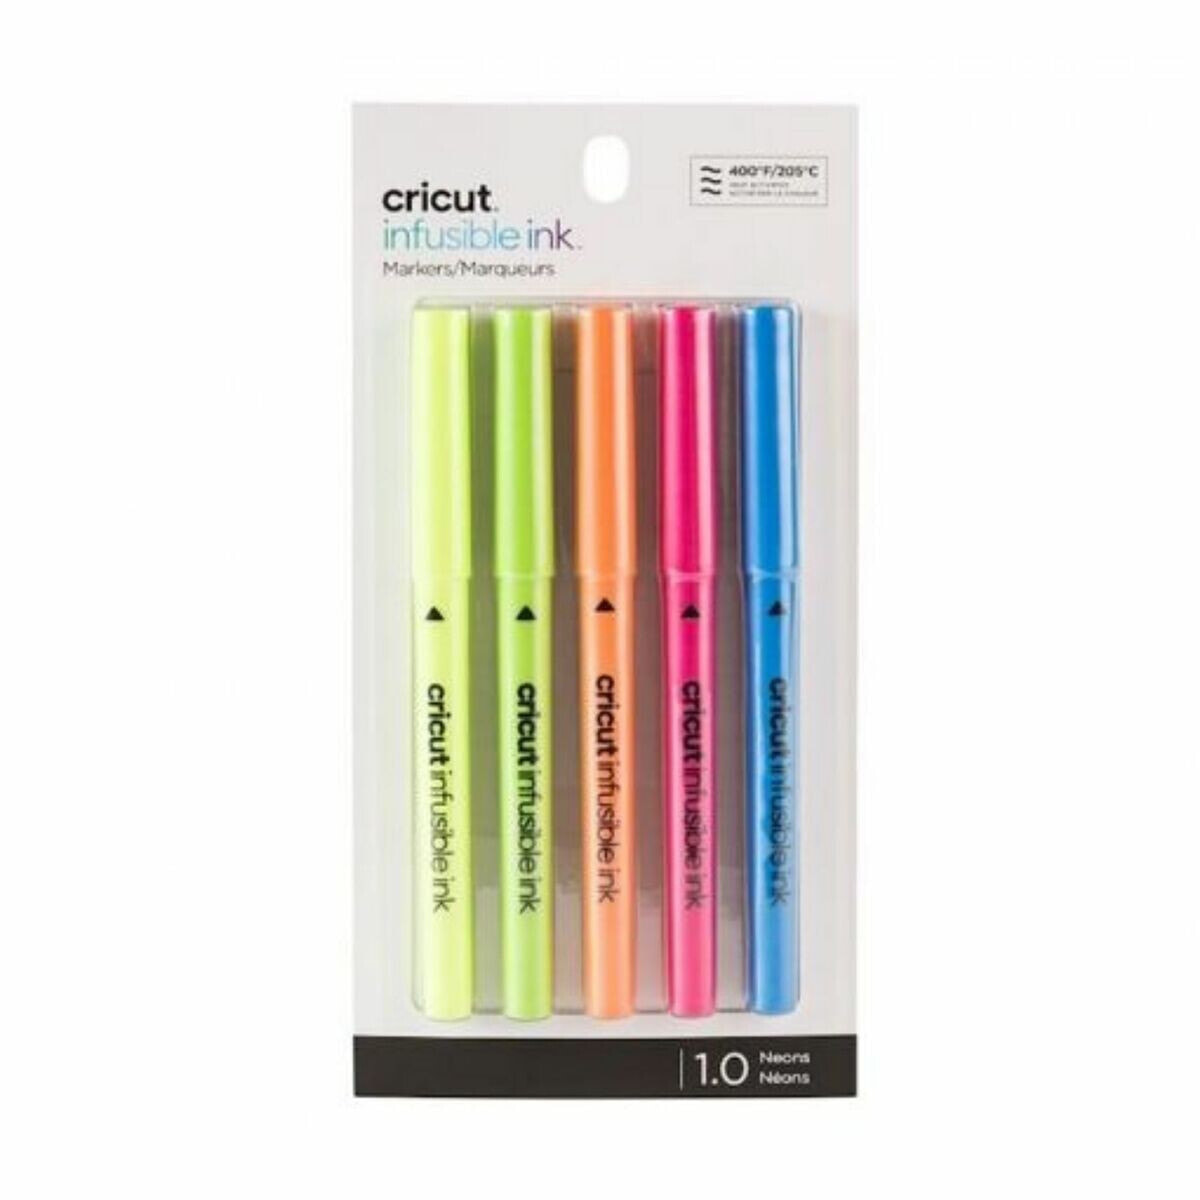 Infusible Markers for Cutting Plotter Cricut Maker